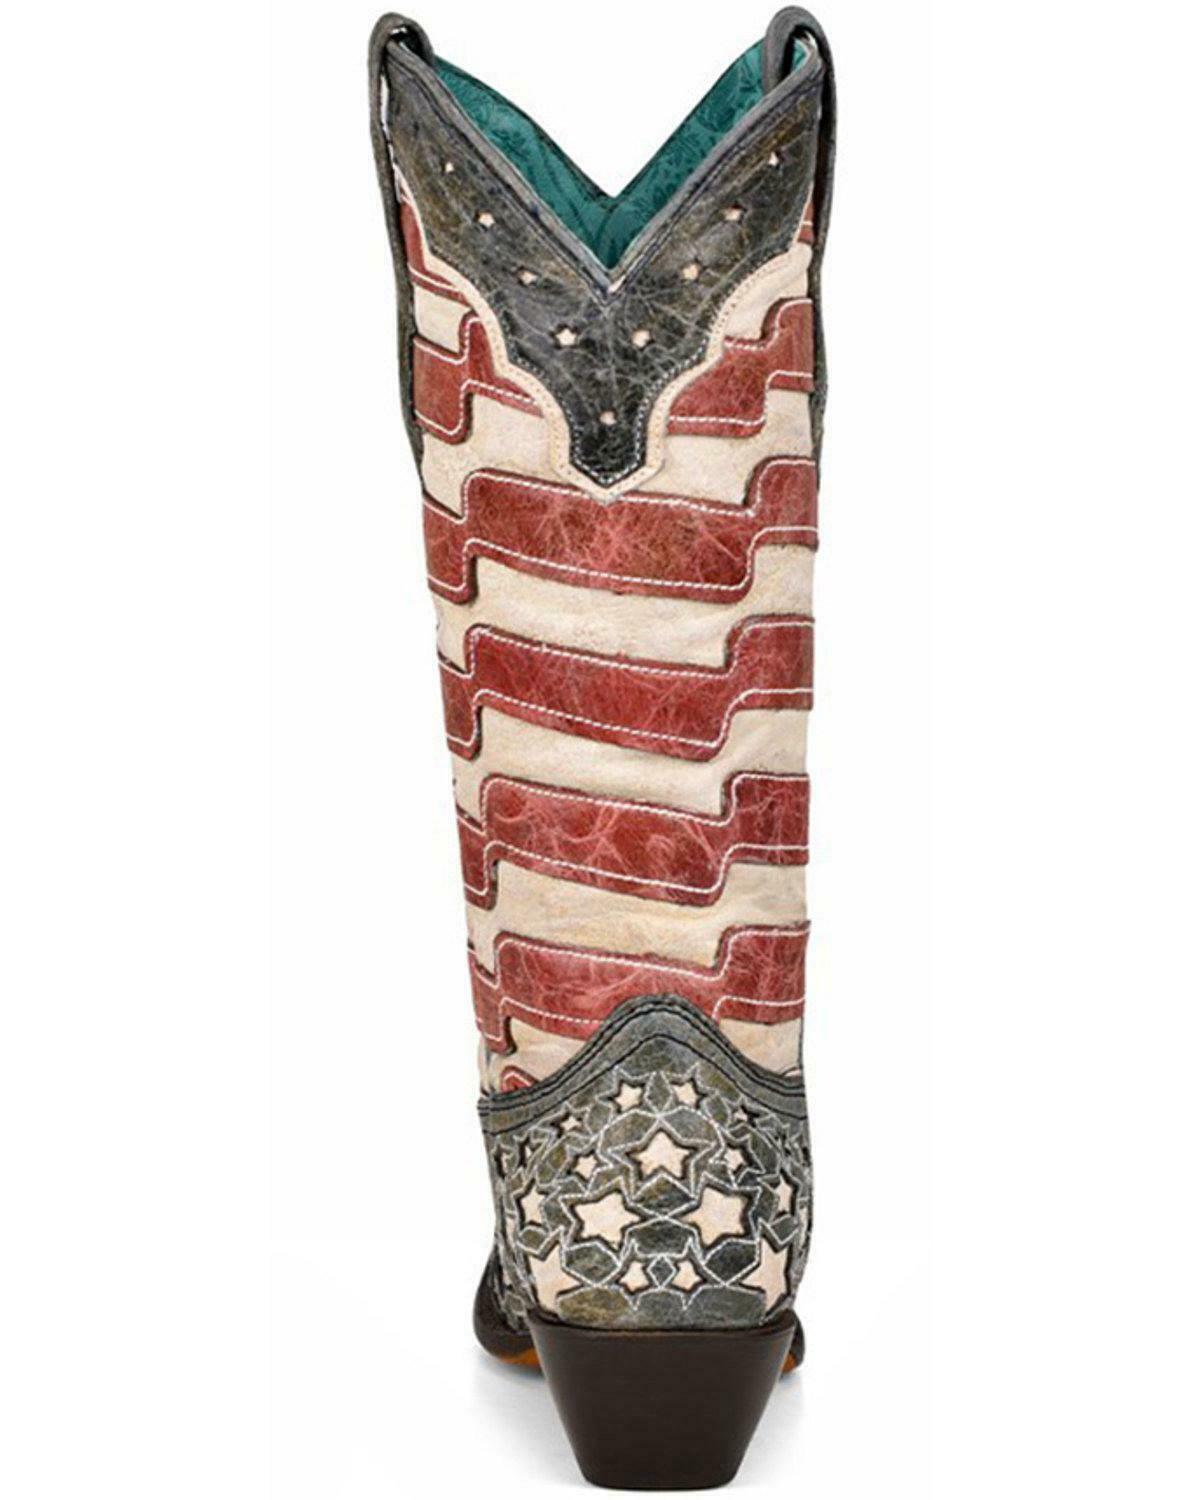 Corral Women's Blue Jeans Stars and Stripes Western Boot - Snip Toe - A4152